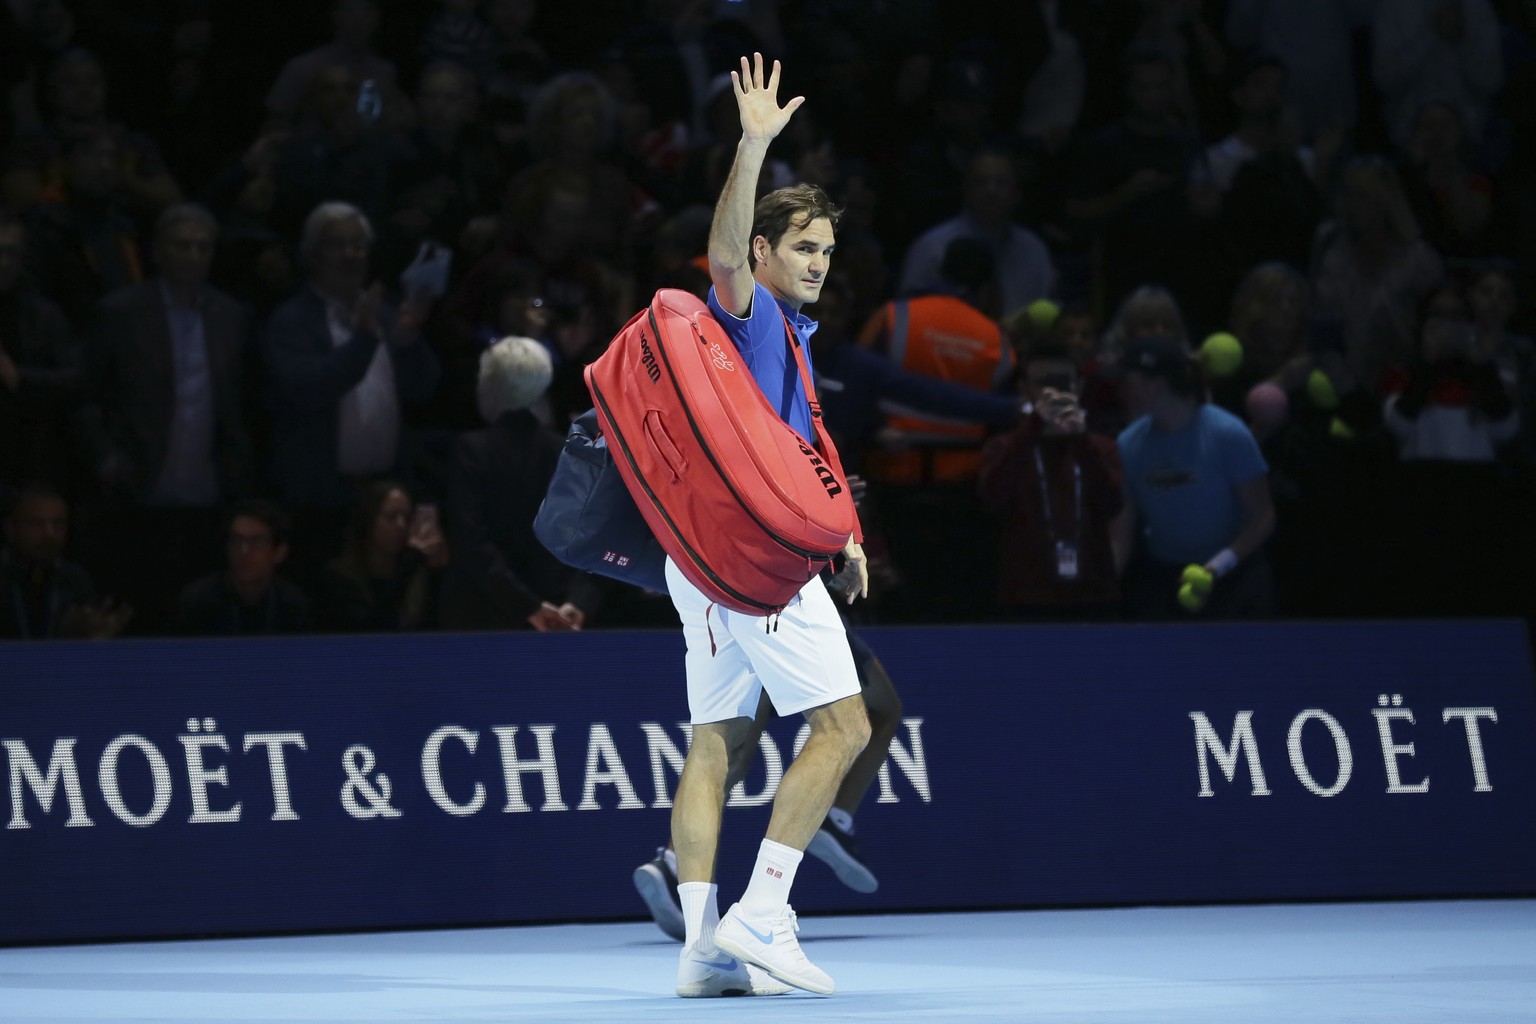 Roger Federer of Switzerland walks off court after losing to Alexander Zverev of Germany in their ATP World Tour Finals singles tennis match at the O2 Arena in London, Saturday Nov. 17, 2018. (AP Phot ...